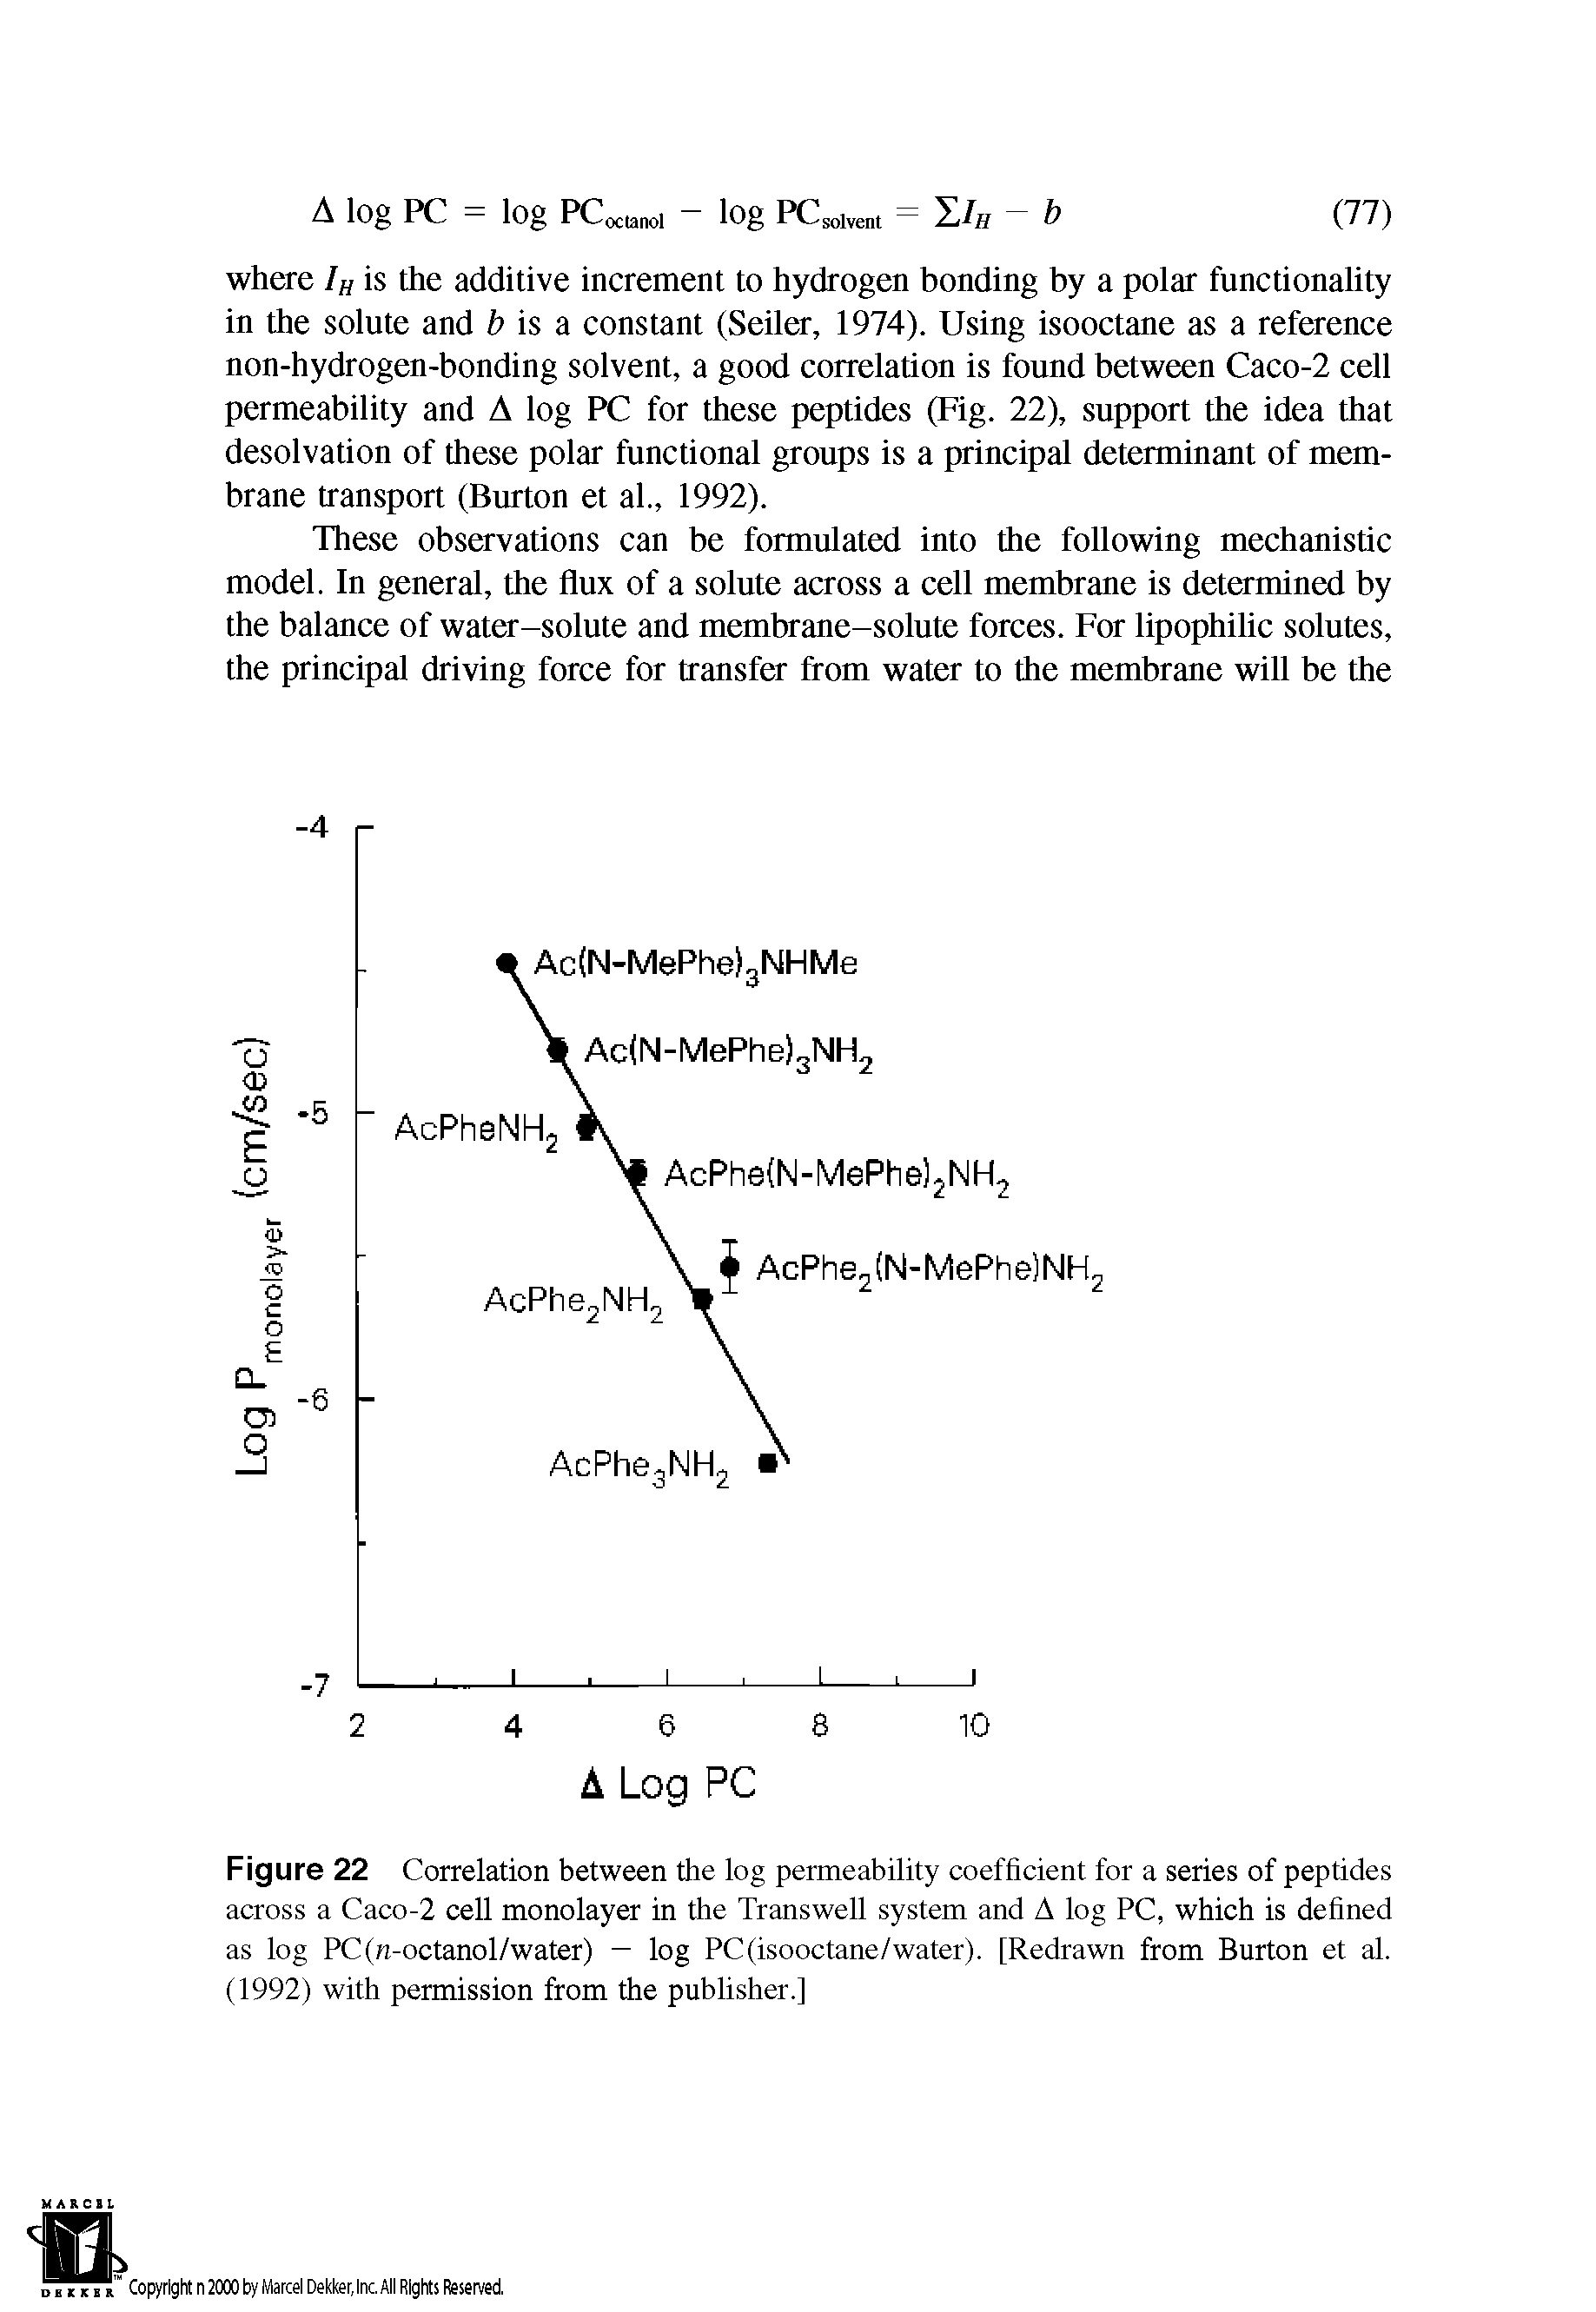 Figure 22 Correlation between the log permeability coefficient for a series of peptides across a Caco-2 cell monolayer in the Transwell system and A log PC, which is defined as log PC(n-octanol/water) — log PC (isooctane/water). [Redrawn from Burton et al. (1992) with permission from the publisher.]...